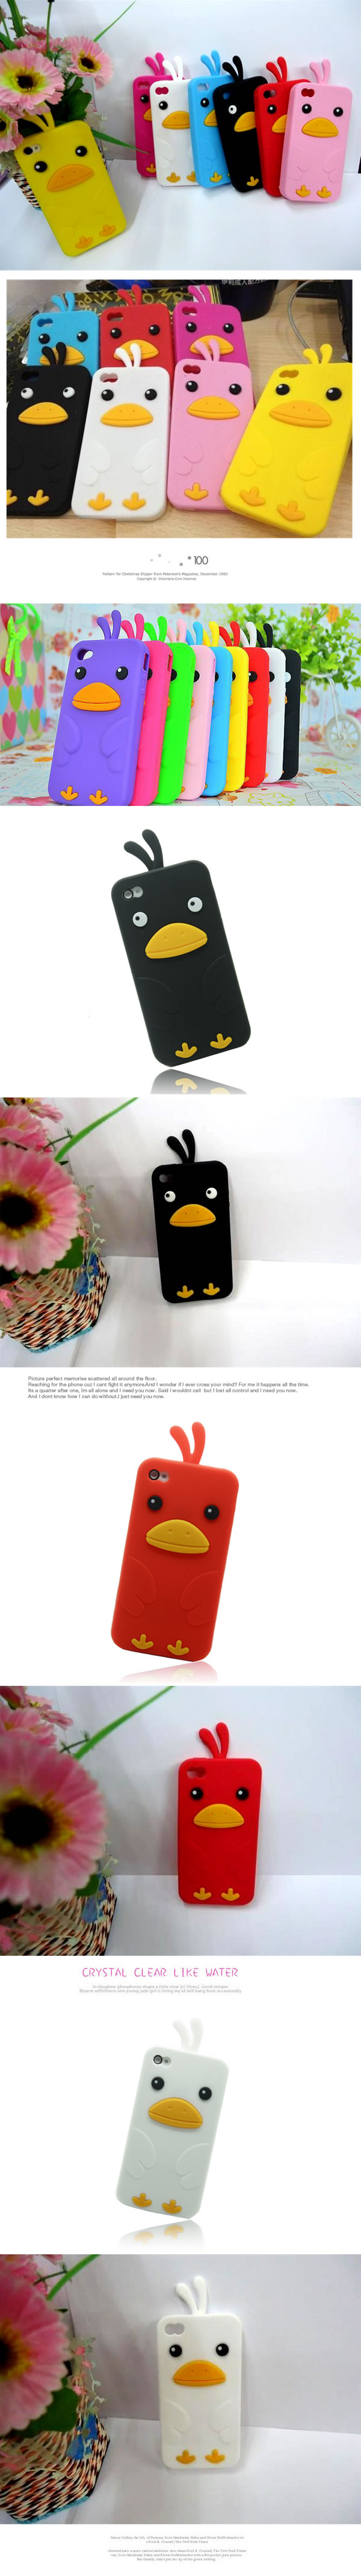 Lace Color will be random Chicken Shape Design Silicon Iphone 4 4s,Iphone 4/4s